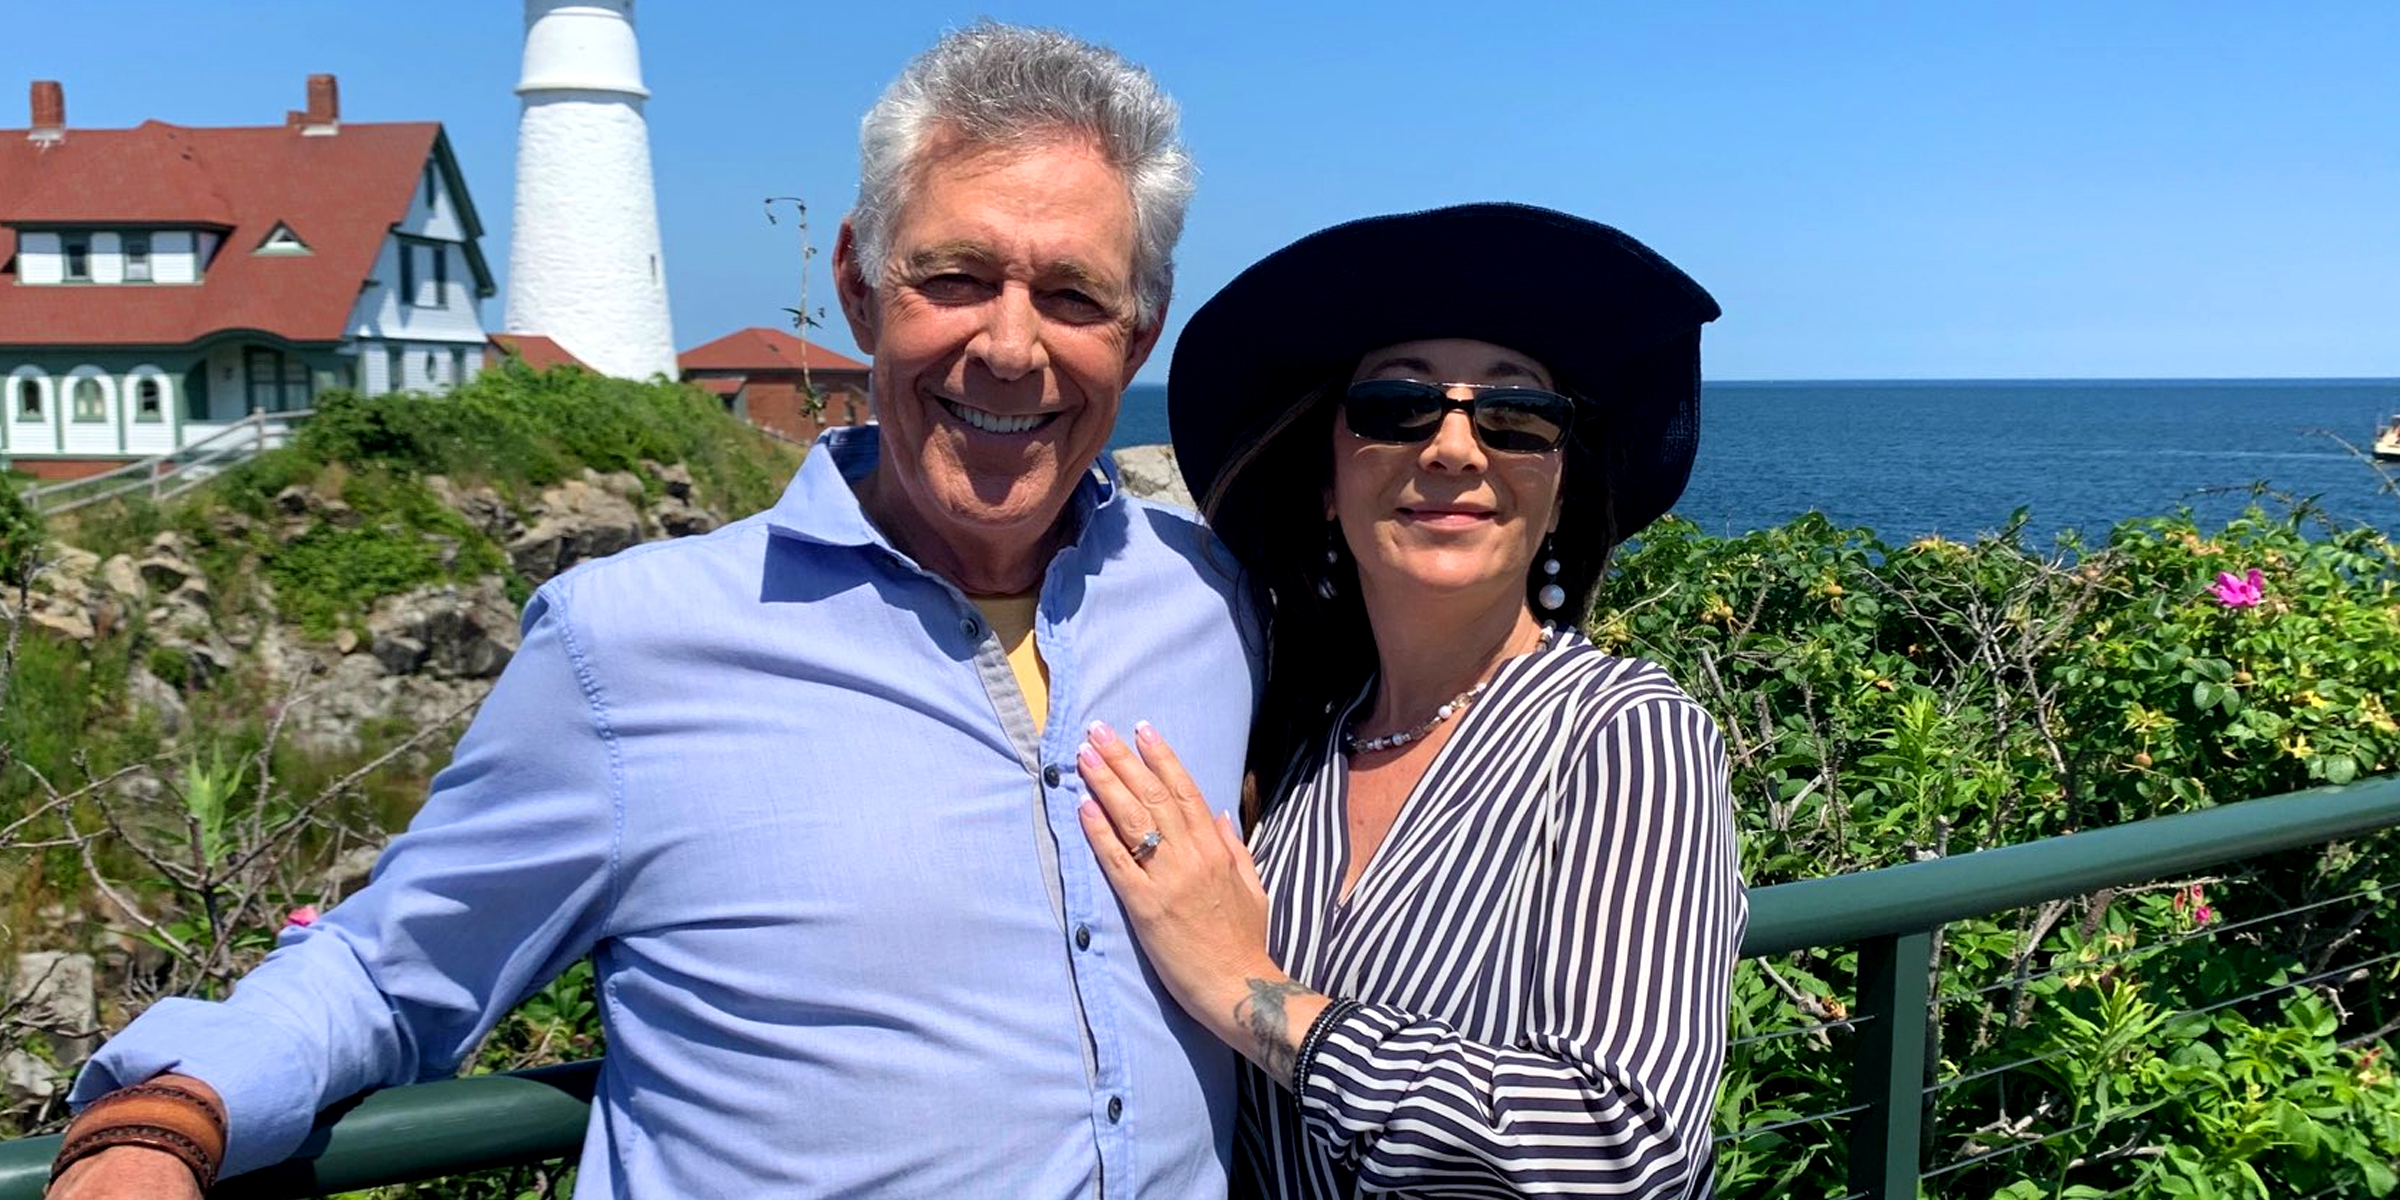 Barry Williams and Tina Mahina | Source: X (formerly twitter)/MrBarryWilliams